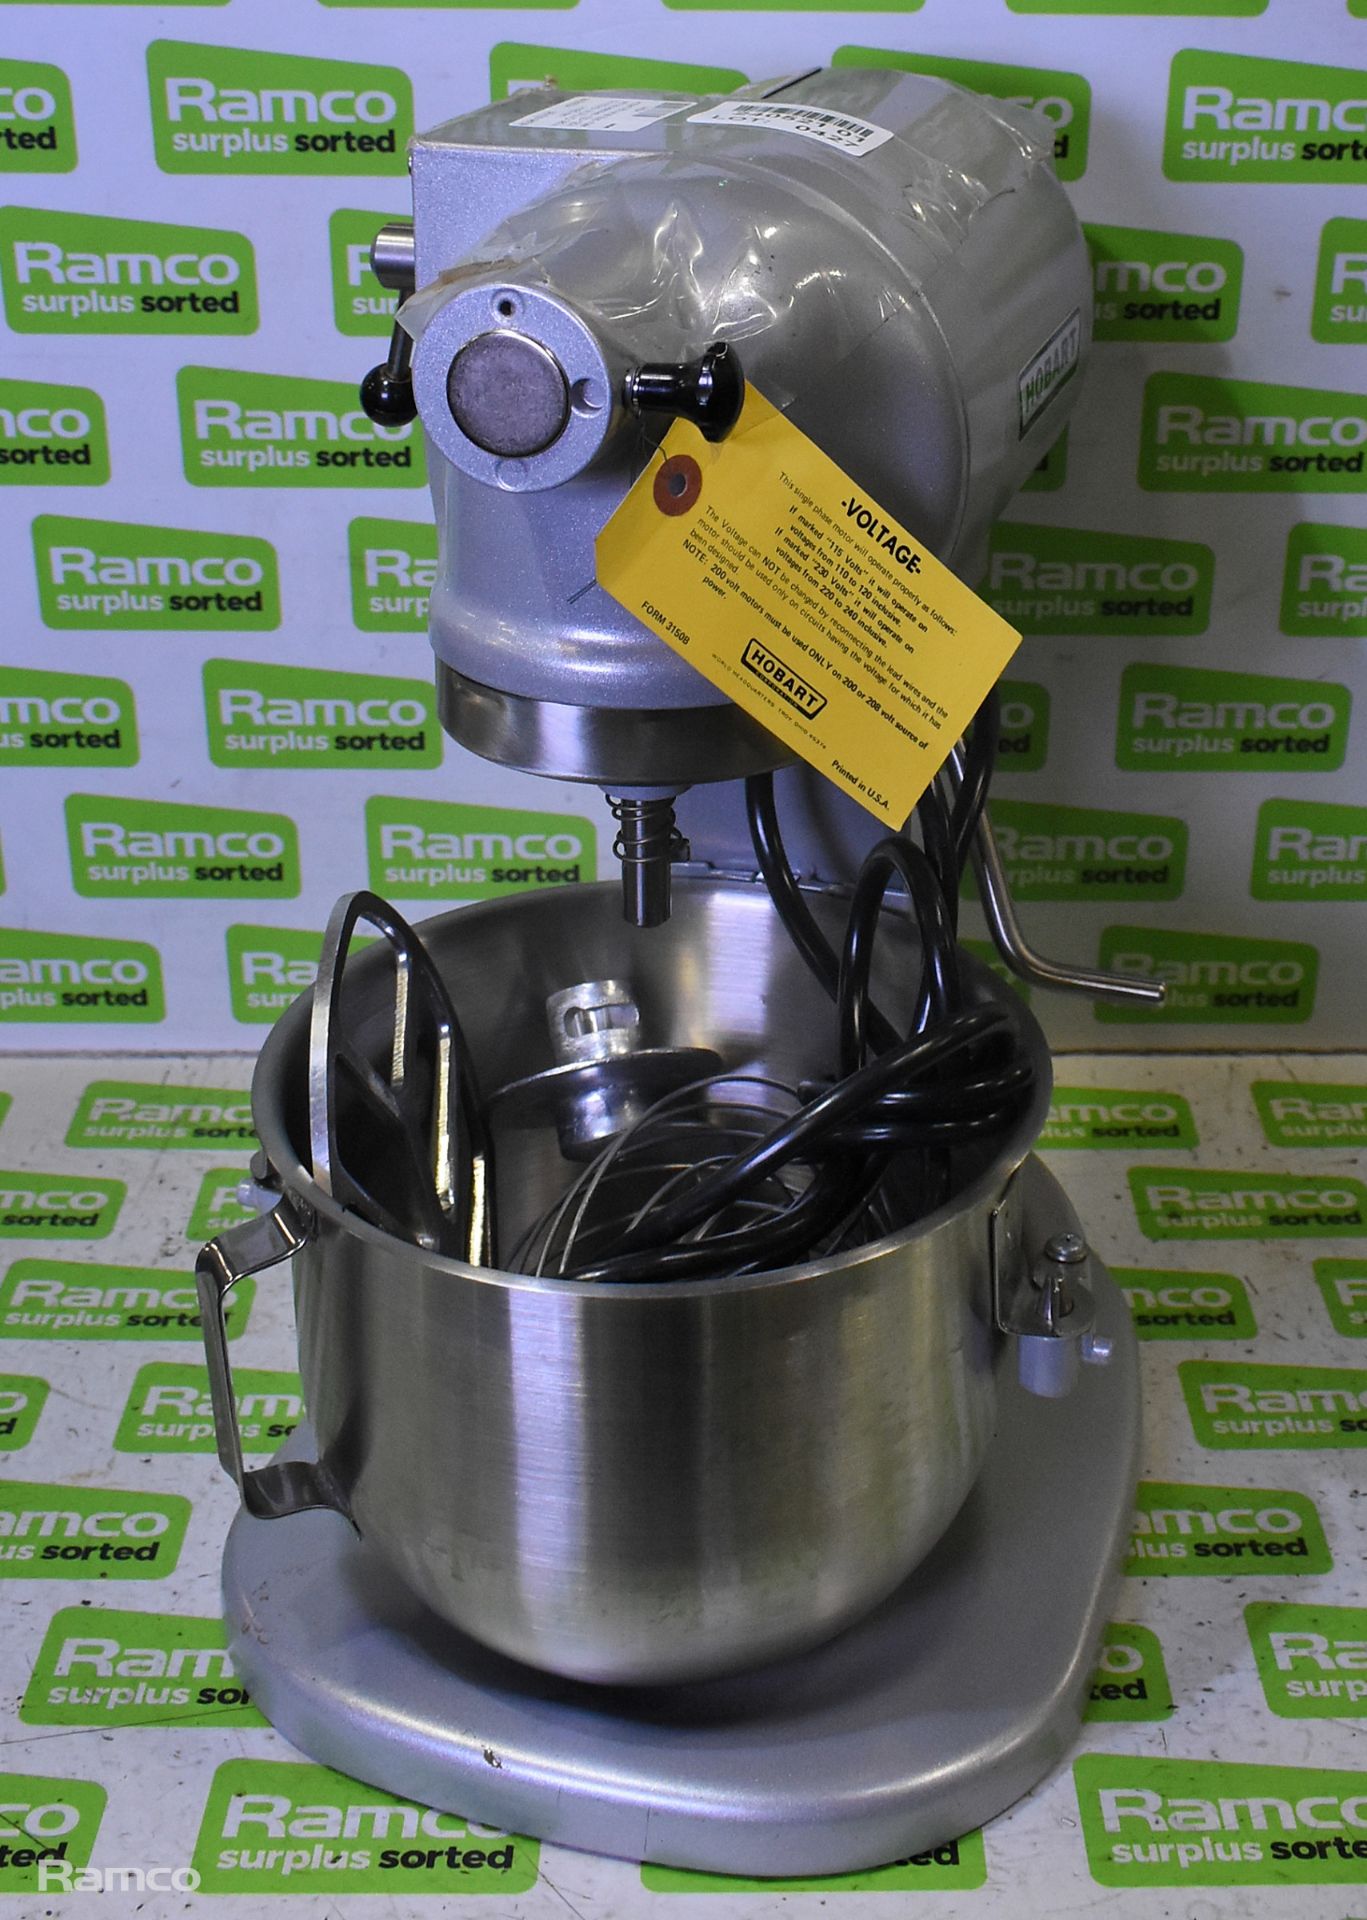 Hobart N50 small food mixer with accessories - 100-120V - 1ph - 60Hz - W 270 x D 380 x H 430mm - Image 2 of 10